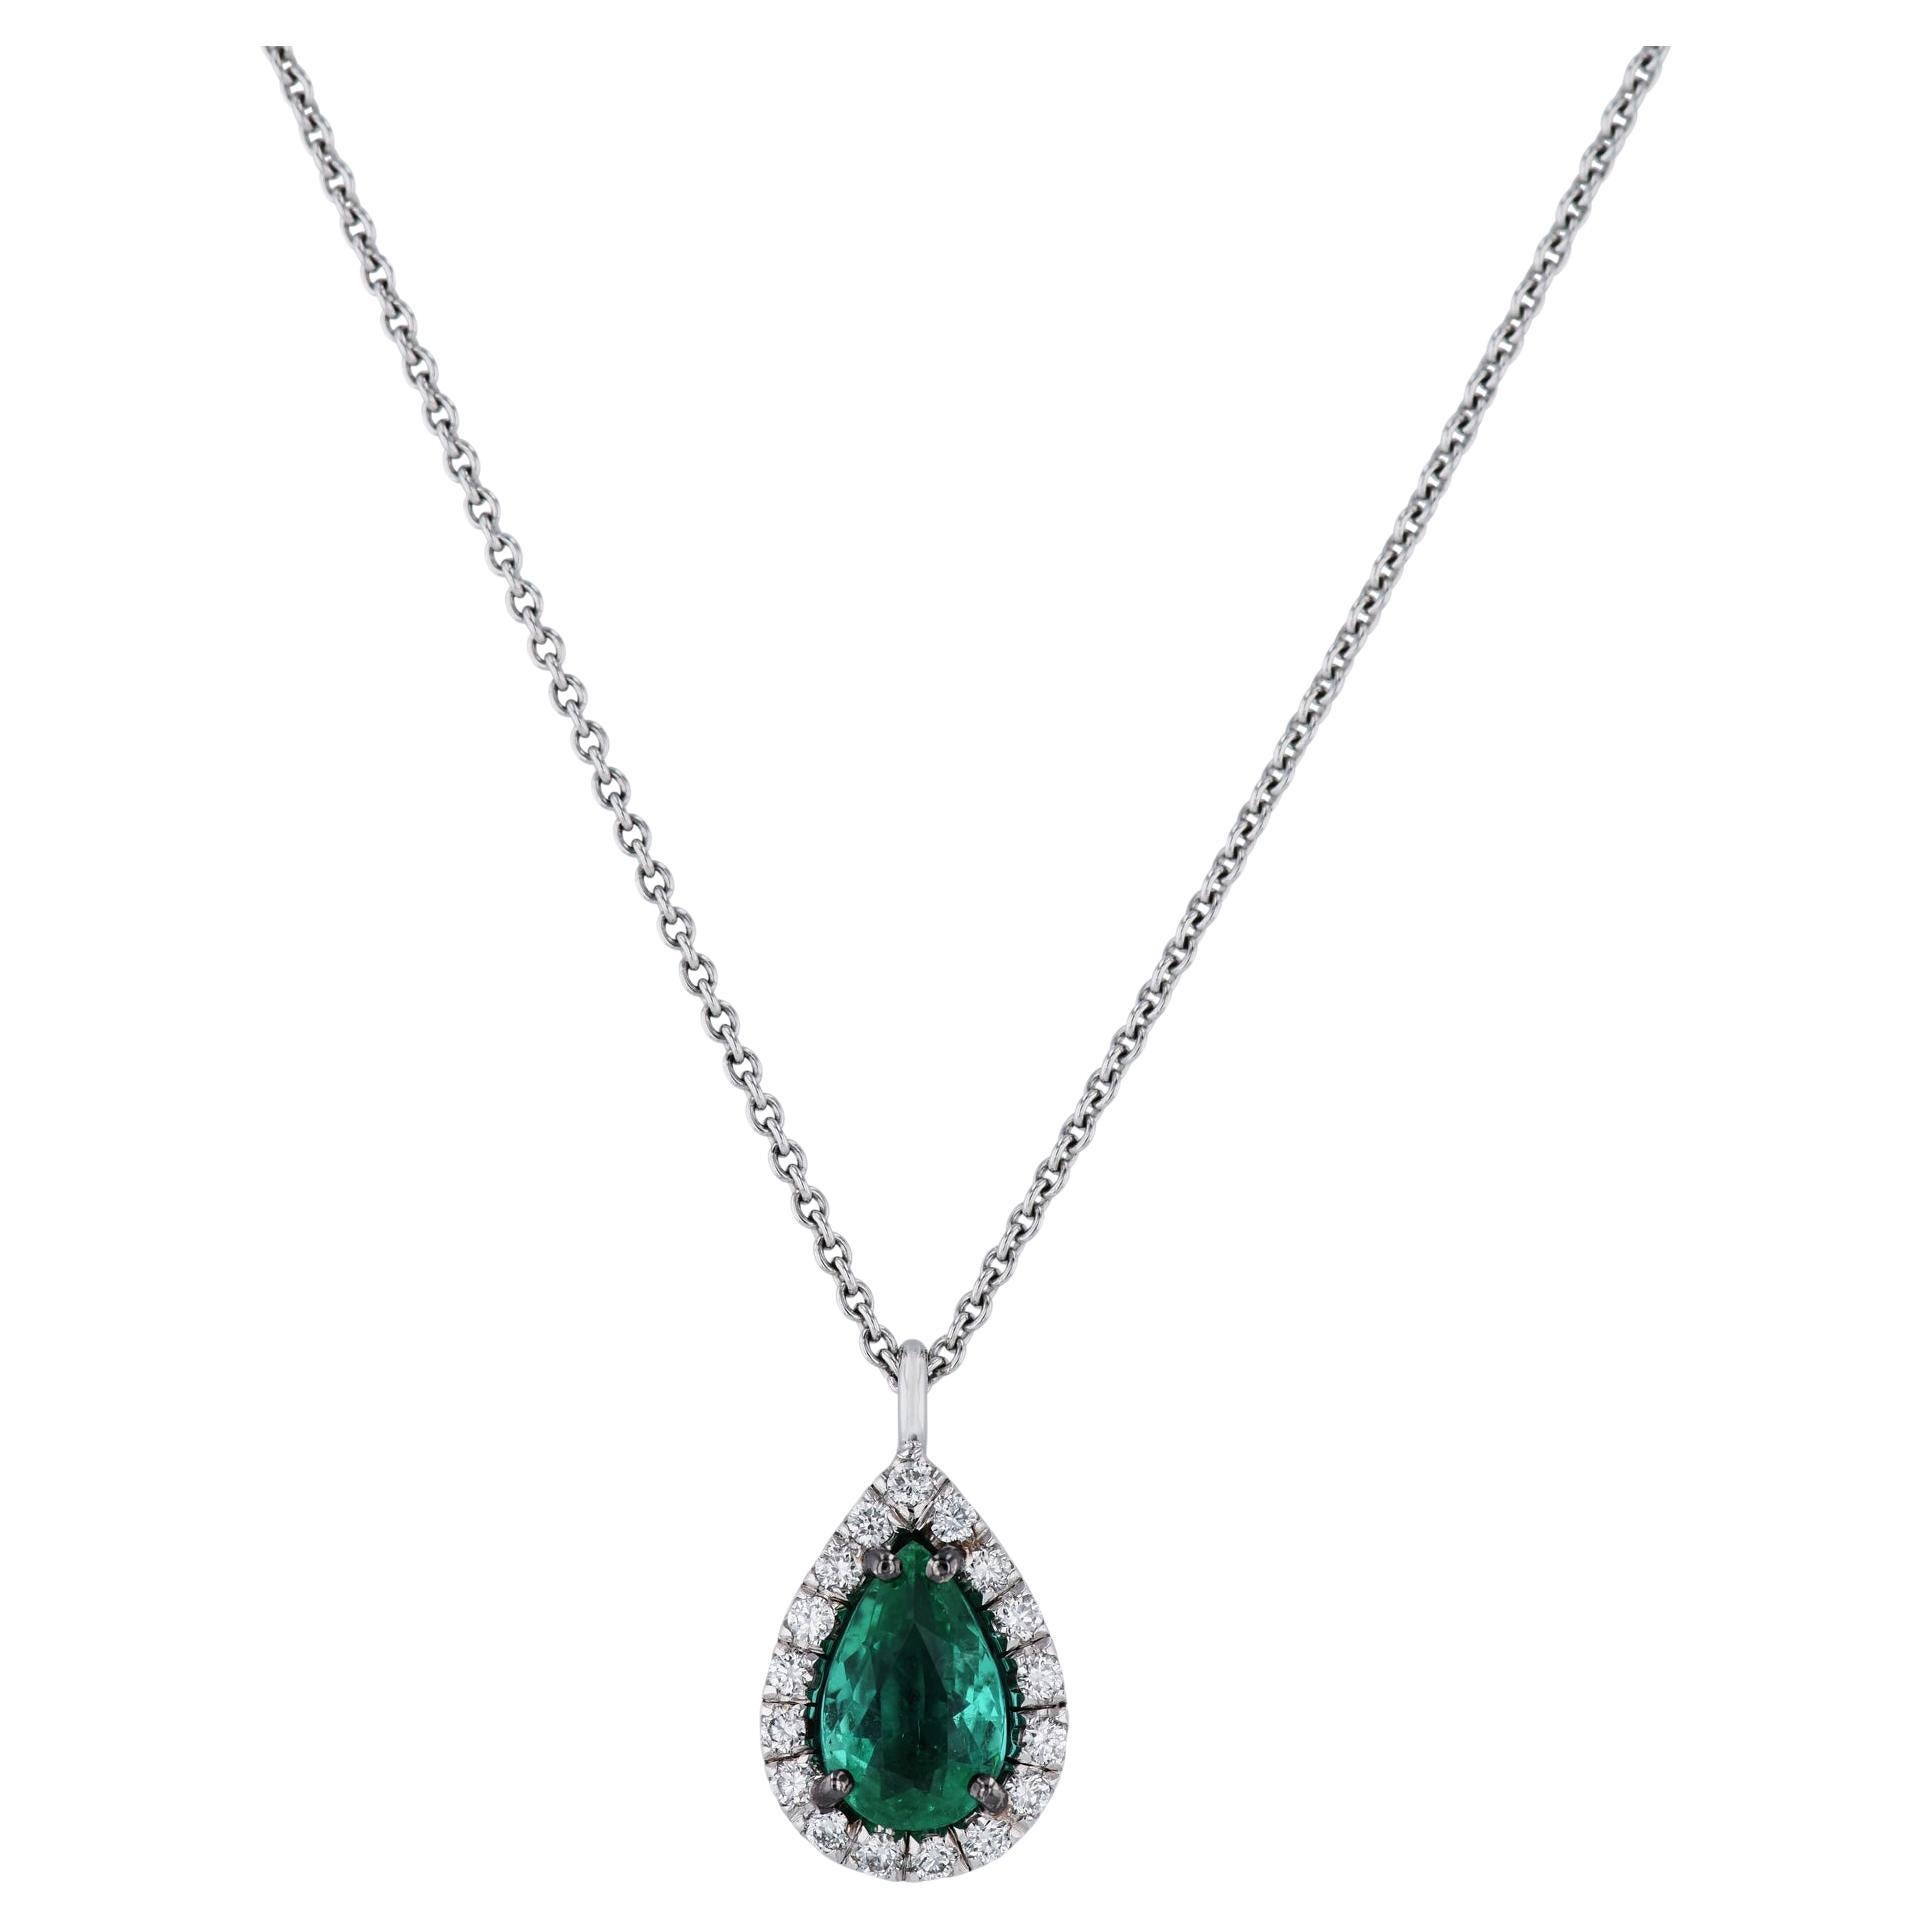 Handmade Colombian Emerald White Gold Diamond Pendant Necklace For Sale